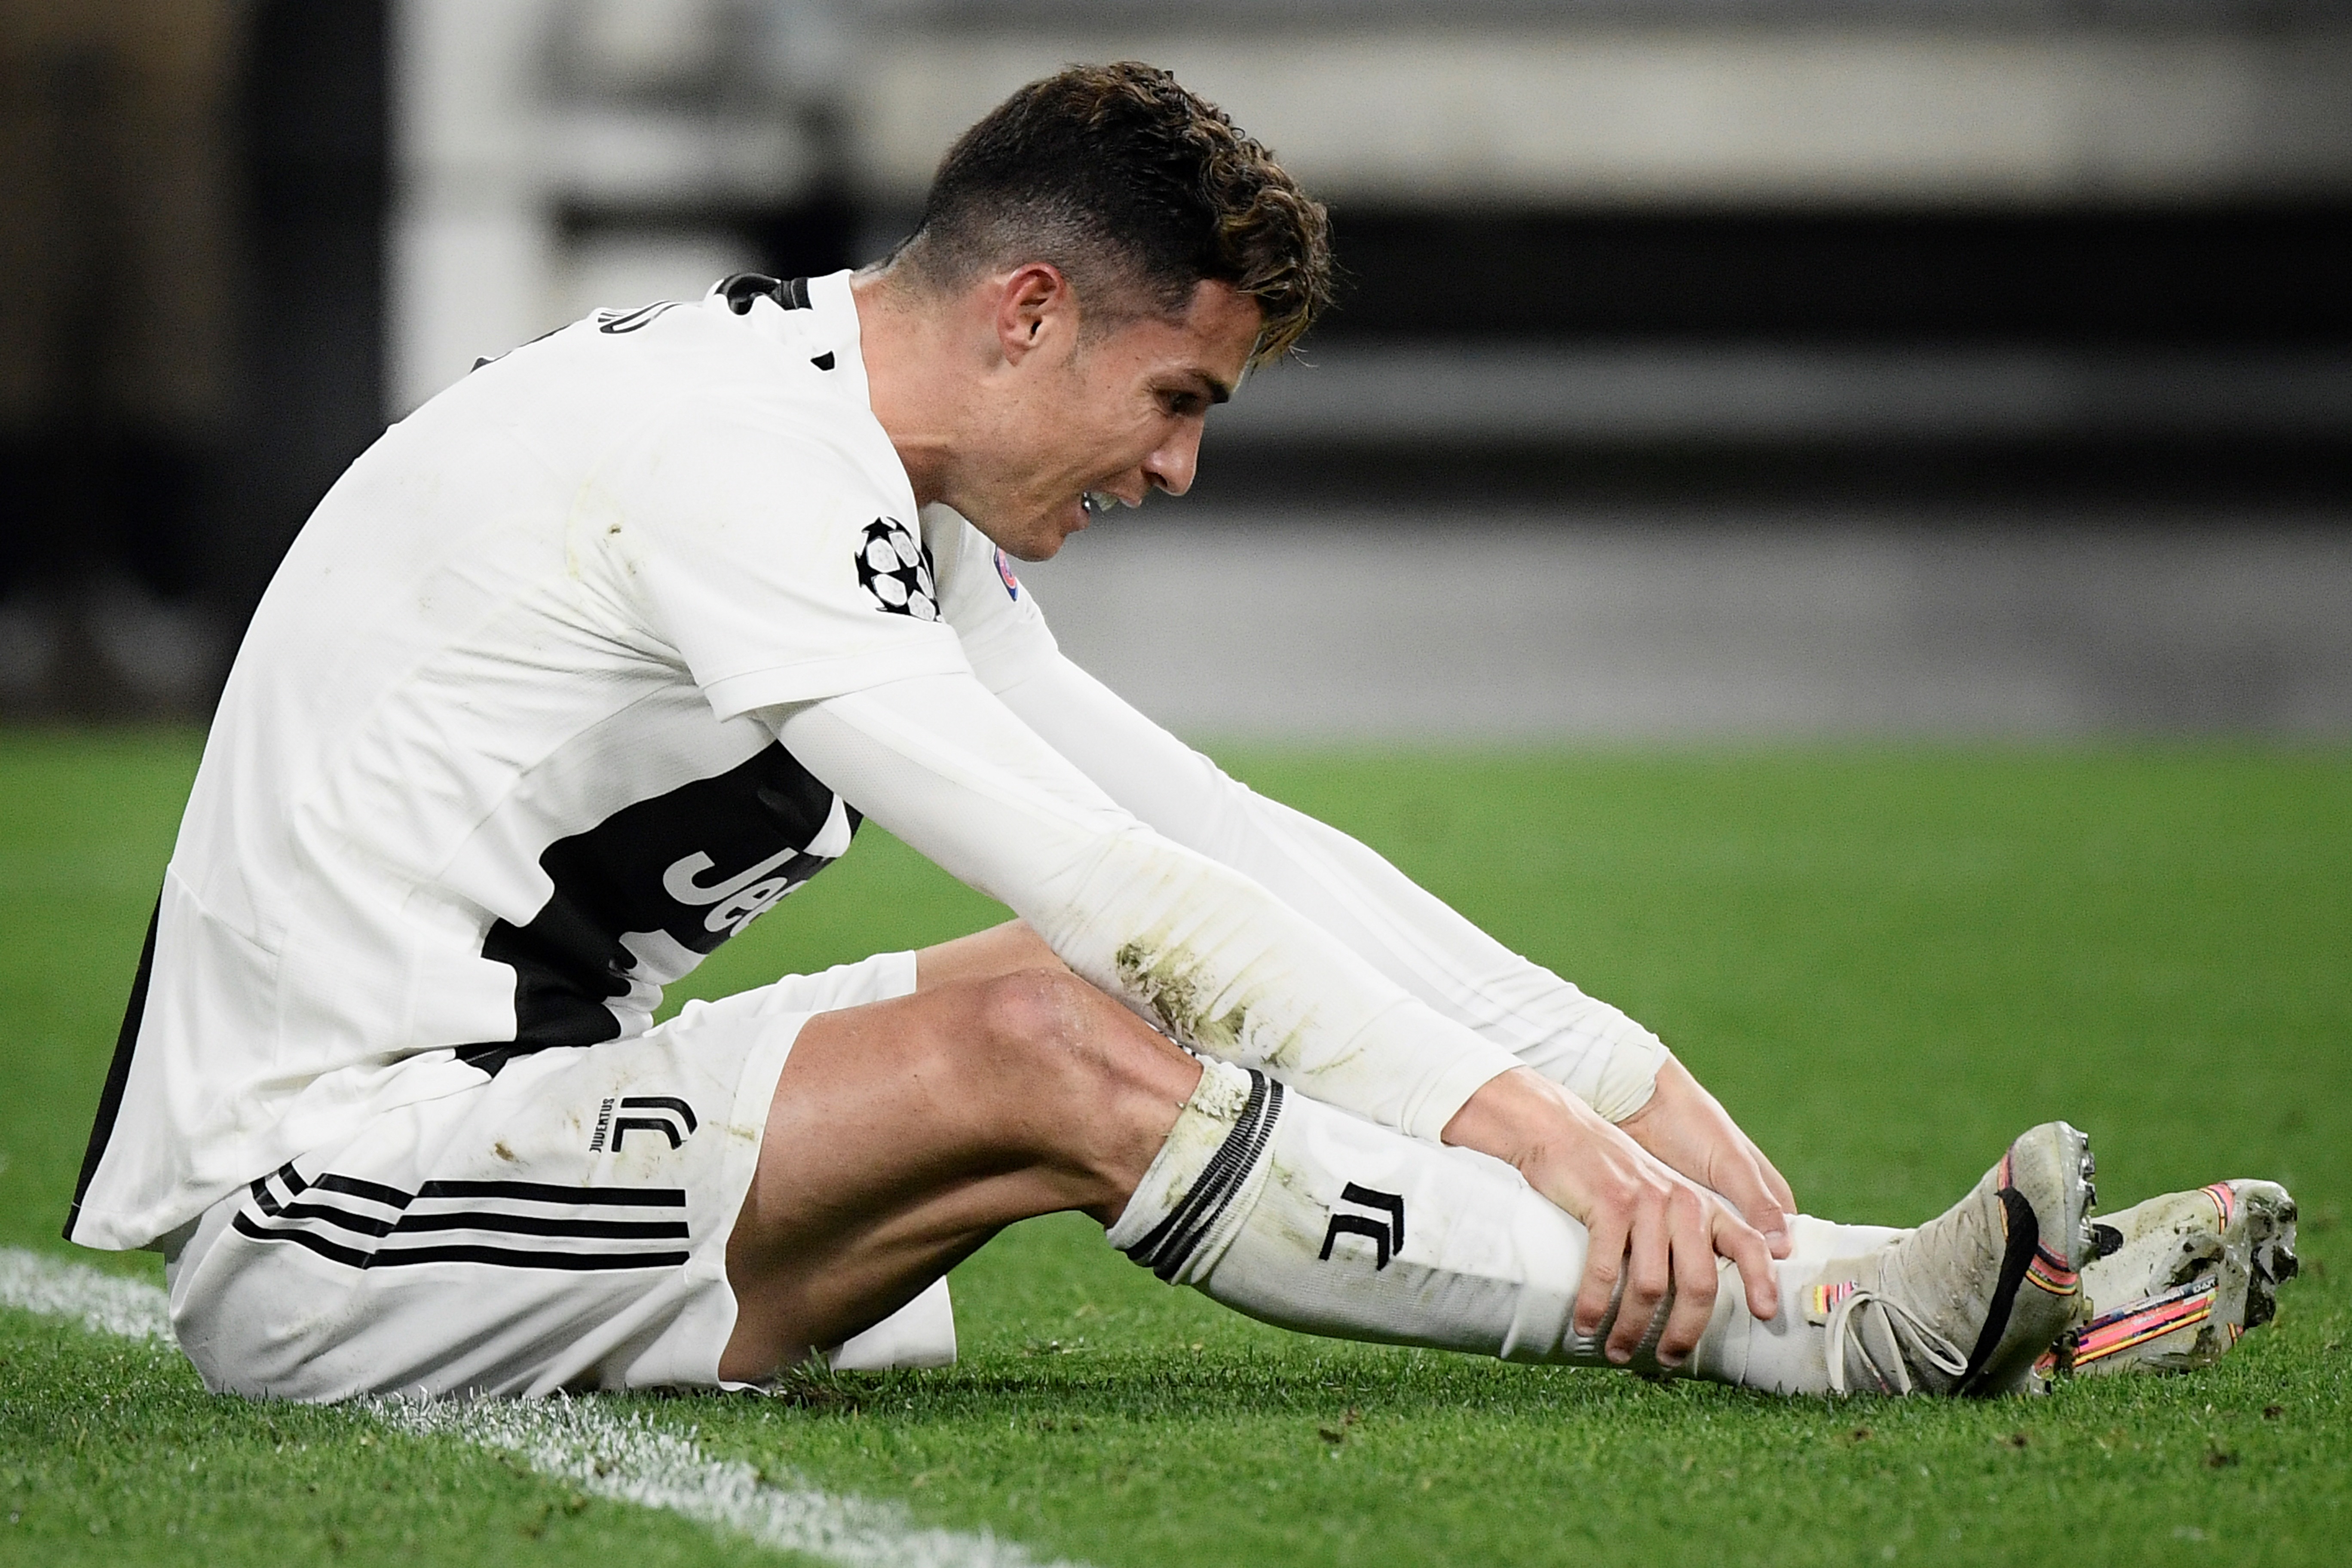 Ronaldo scored, but couldn't prevent a defeat (Photo credit should read FILIPPO MONTEFORTE/AFP/Getty Images)